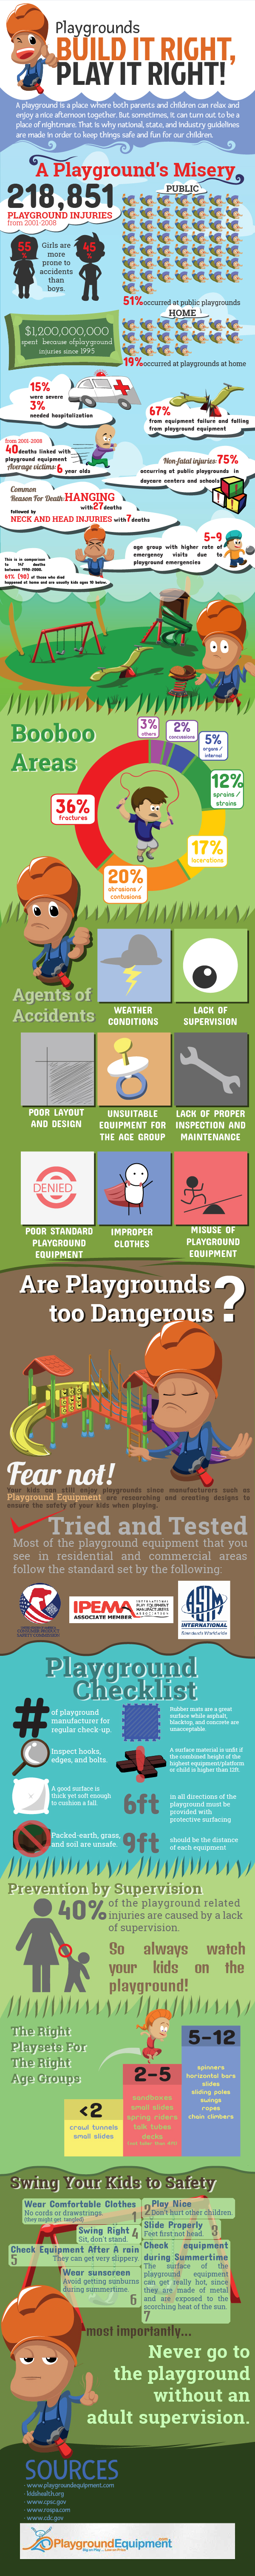 Playgrounds: Build It Right, Play It Right!